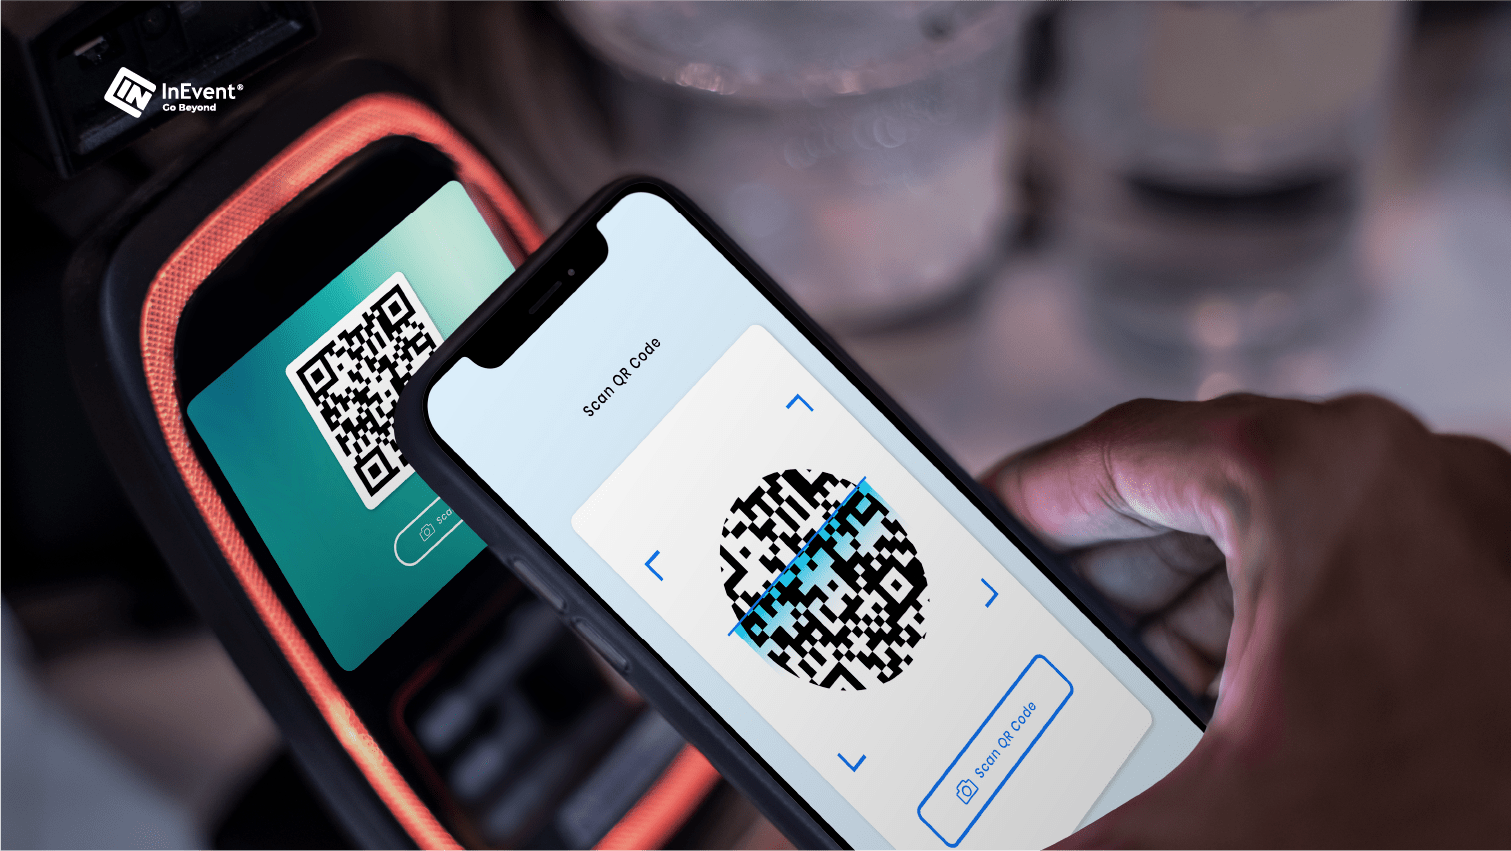 check in software scanning a QR code